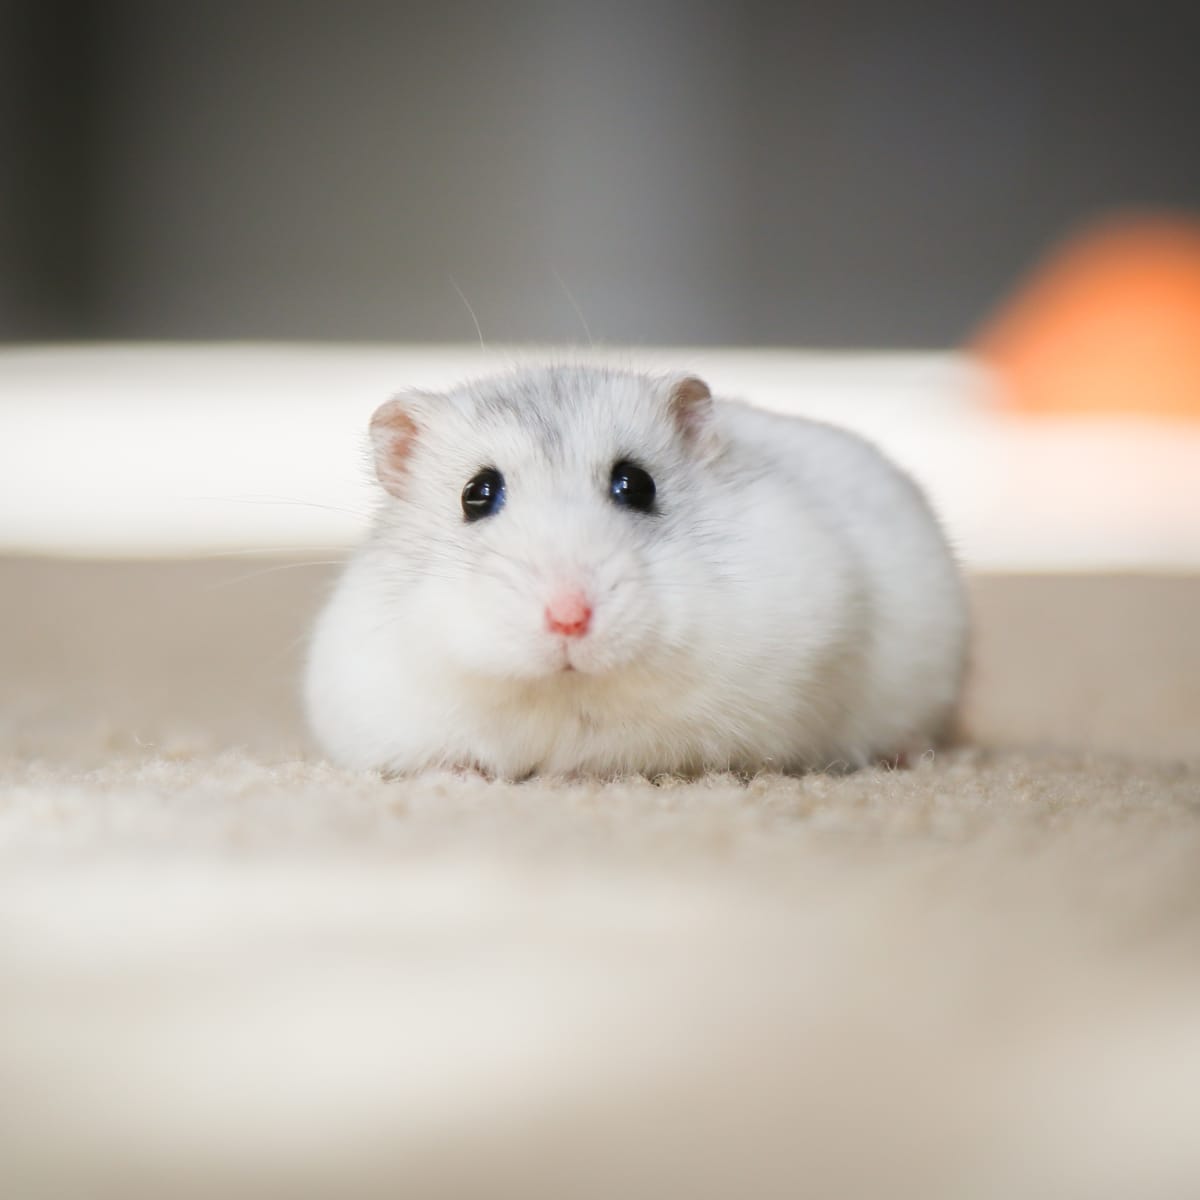 how to tell if your dwarf hamster is pregnant